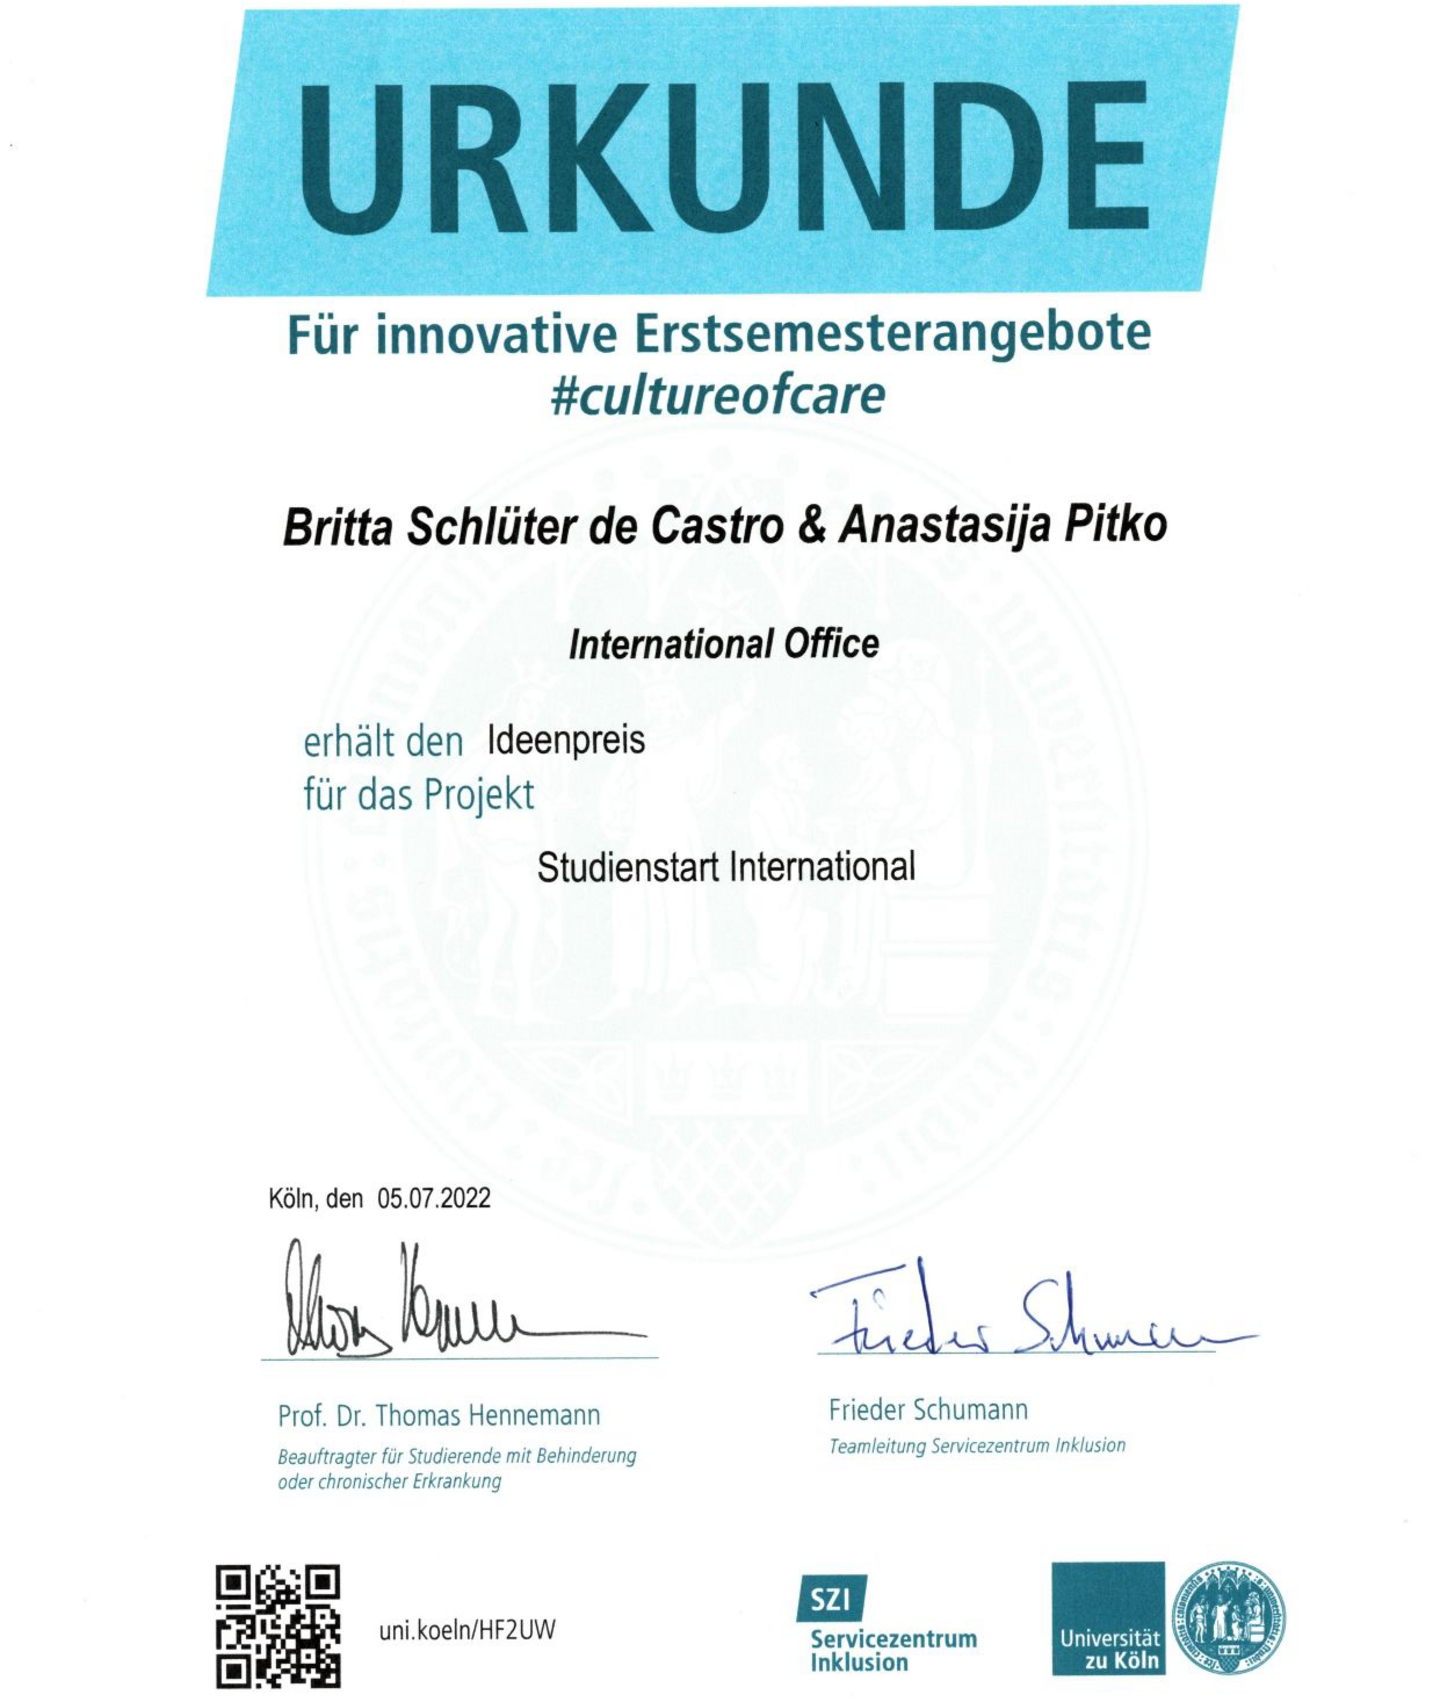 Certificate: For innovative first semester offers #cultureofcare. Britta Schlüter de Castro & Anastasija Pitko, International Office, receive the Ideas Award, for the project Studienstart International. Cologne, 05.07.2022. Signatures: Prof. Dr. Thomas Hennemann, Representative for Students with Disabilities or Chronic Illness; Frieder Schumann, Team Leader Service Center Inclusion. Logos: Service Center Inclusion; University of Cologne